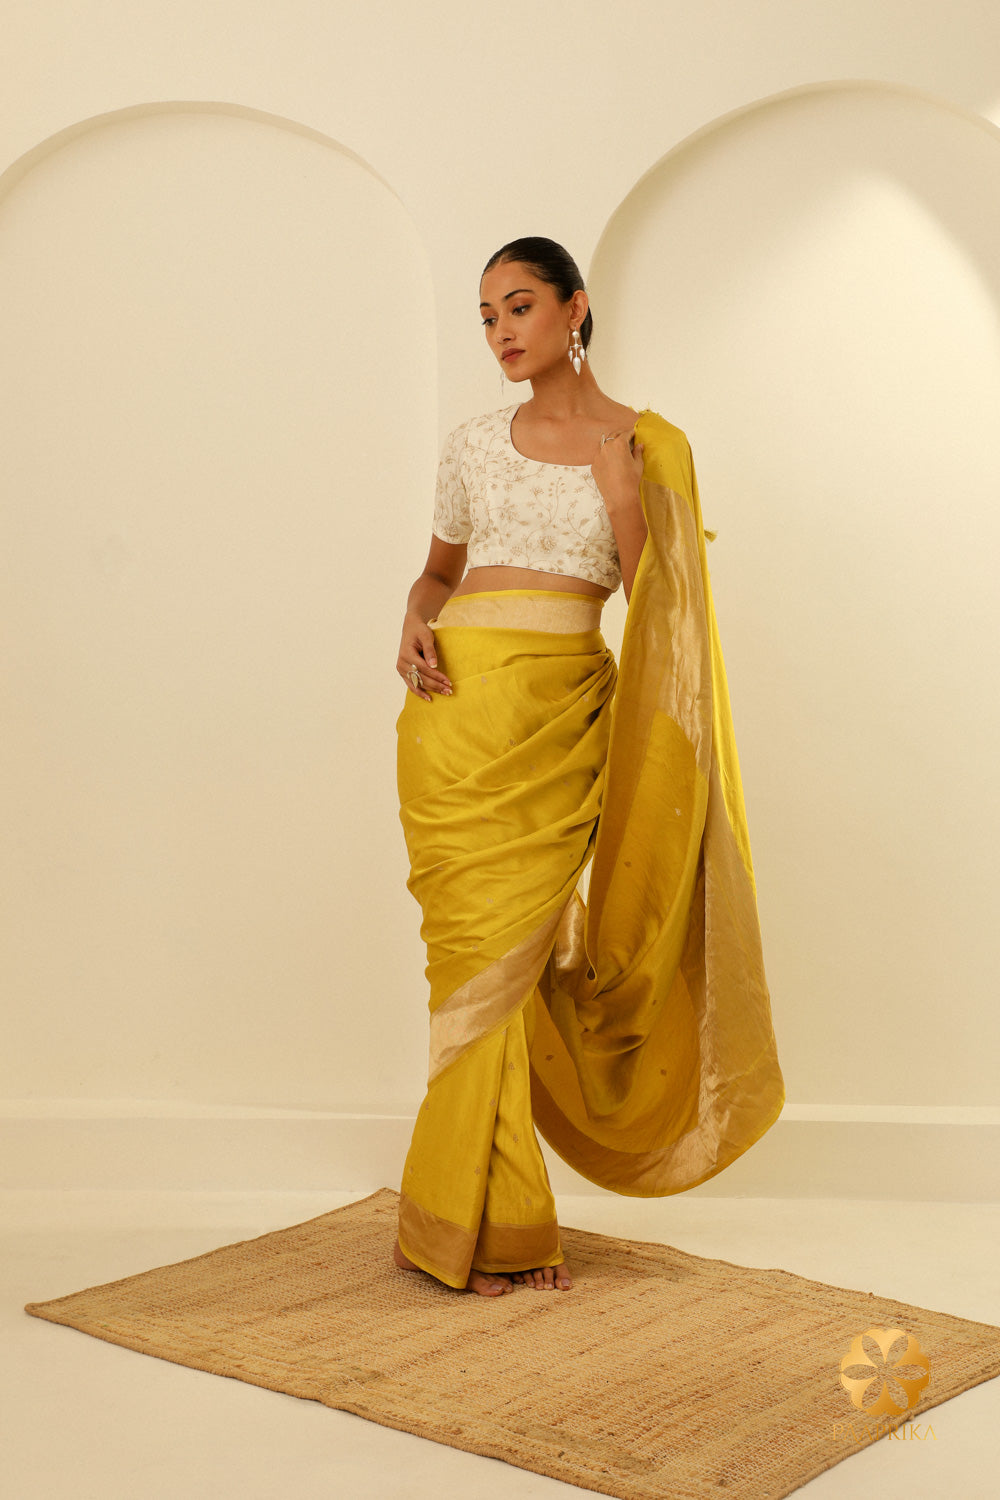 A full view of the saree, draped elegantly, to capture its overall design and dynamic scattered butis.